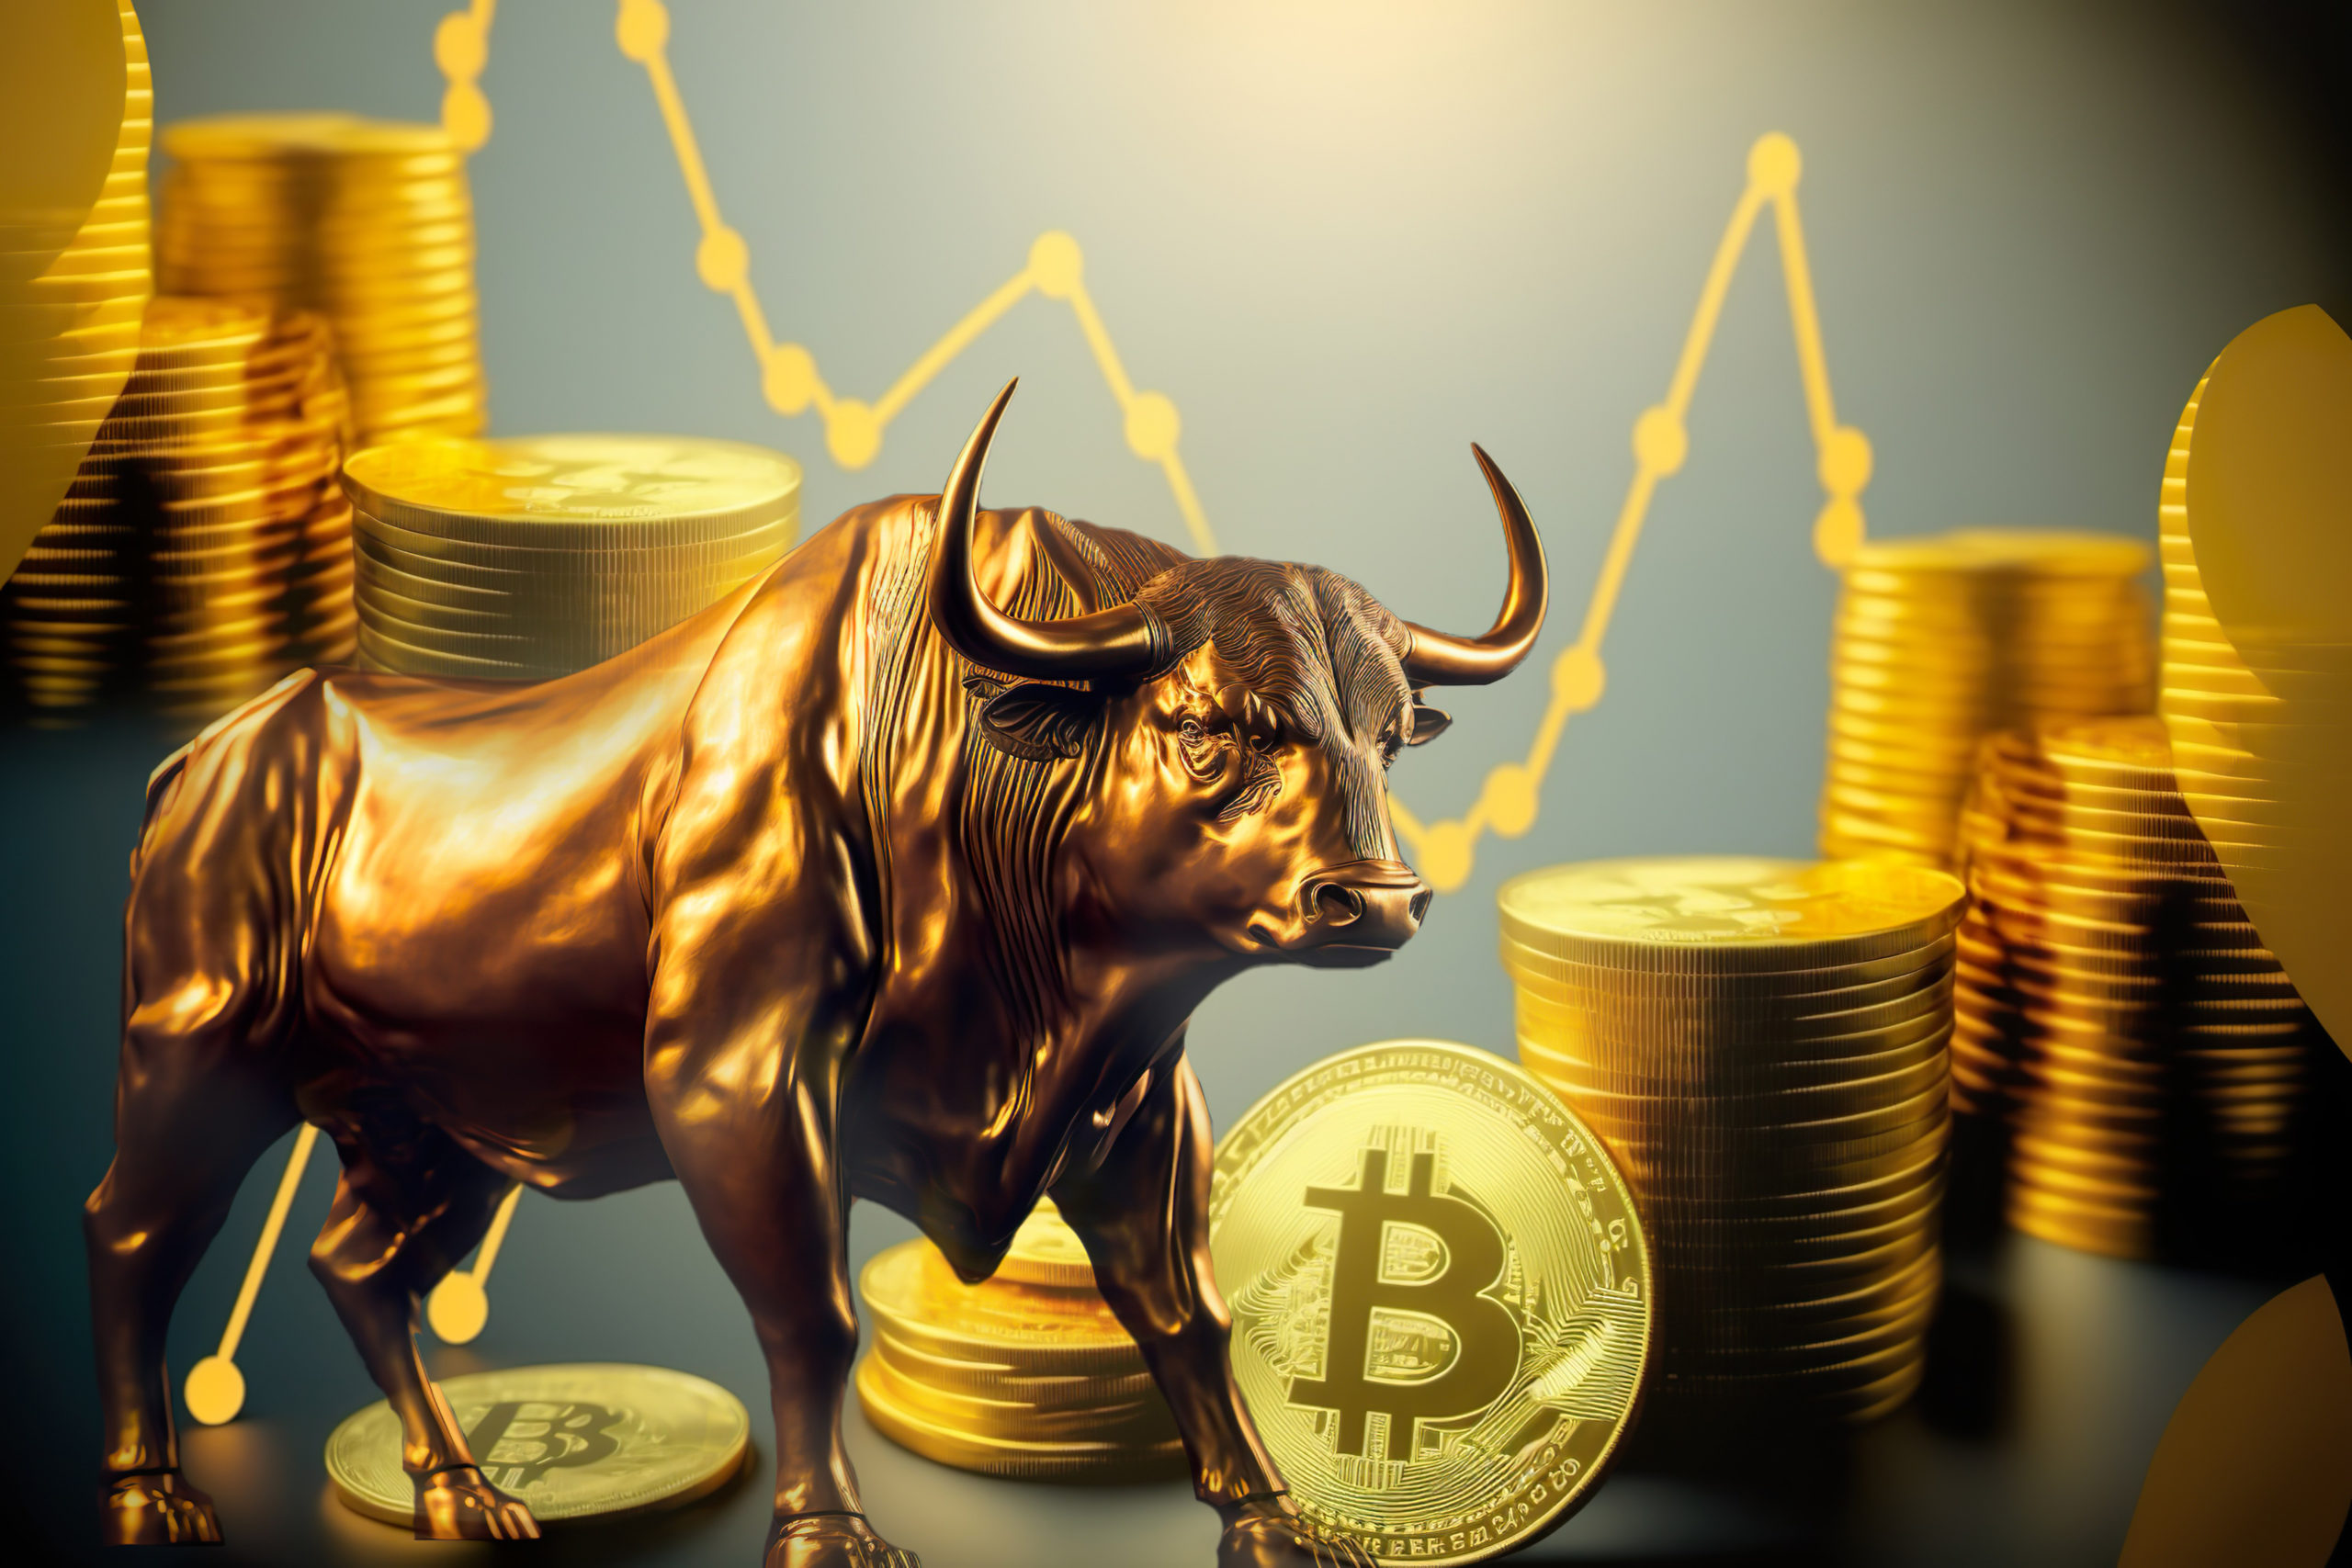 What’s Different About This Bitcoin/Crypto Bull Cycle